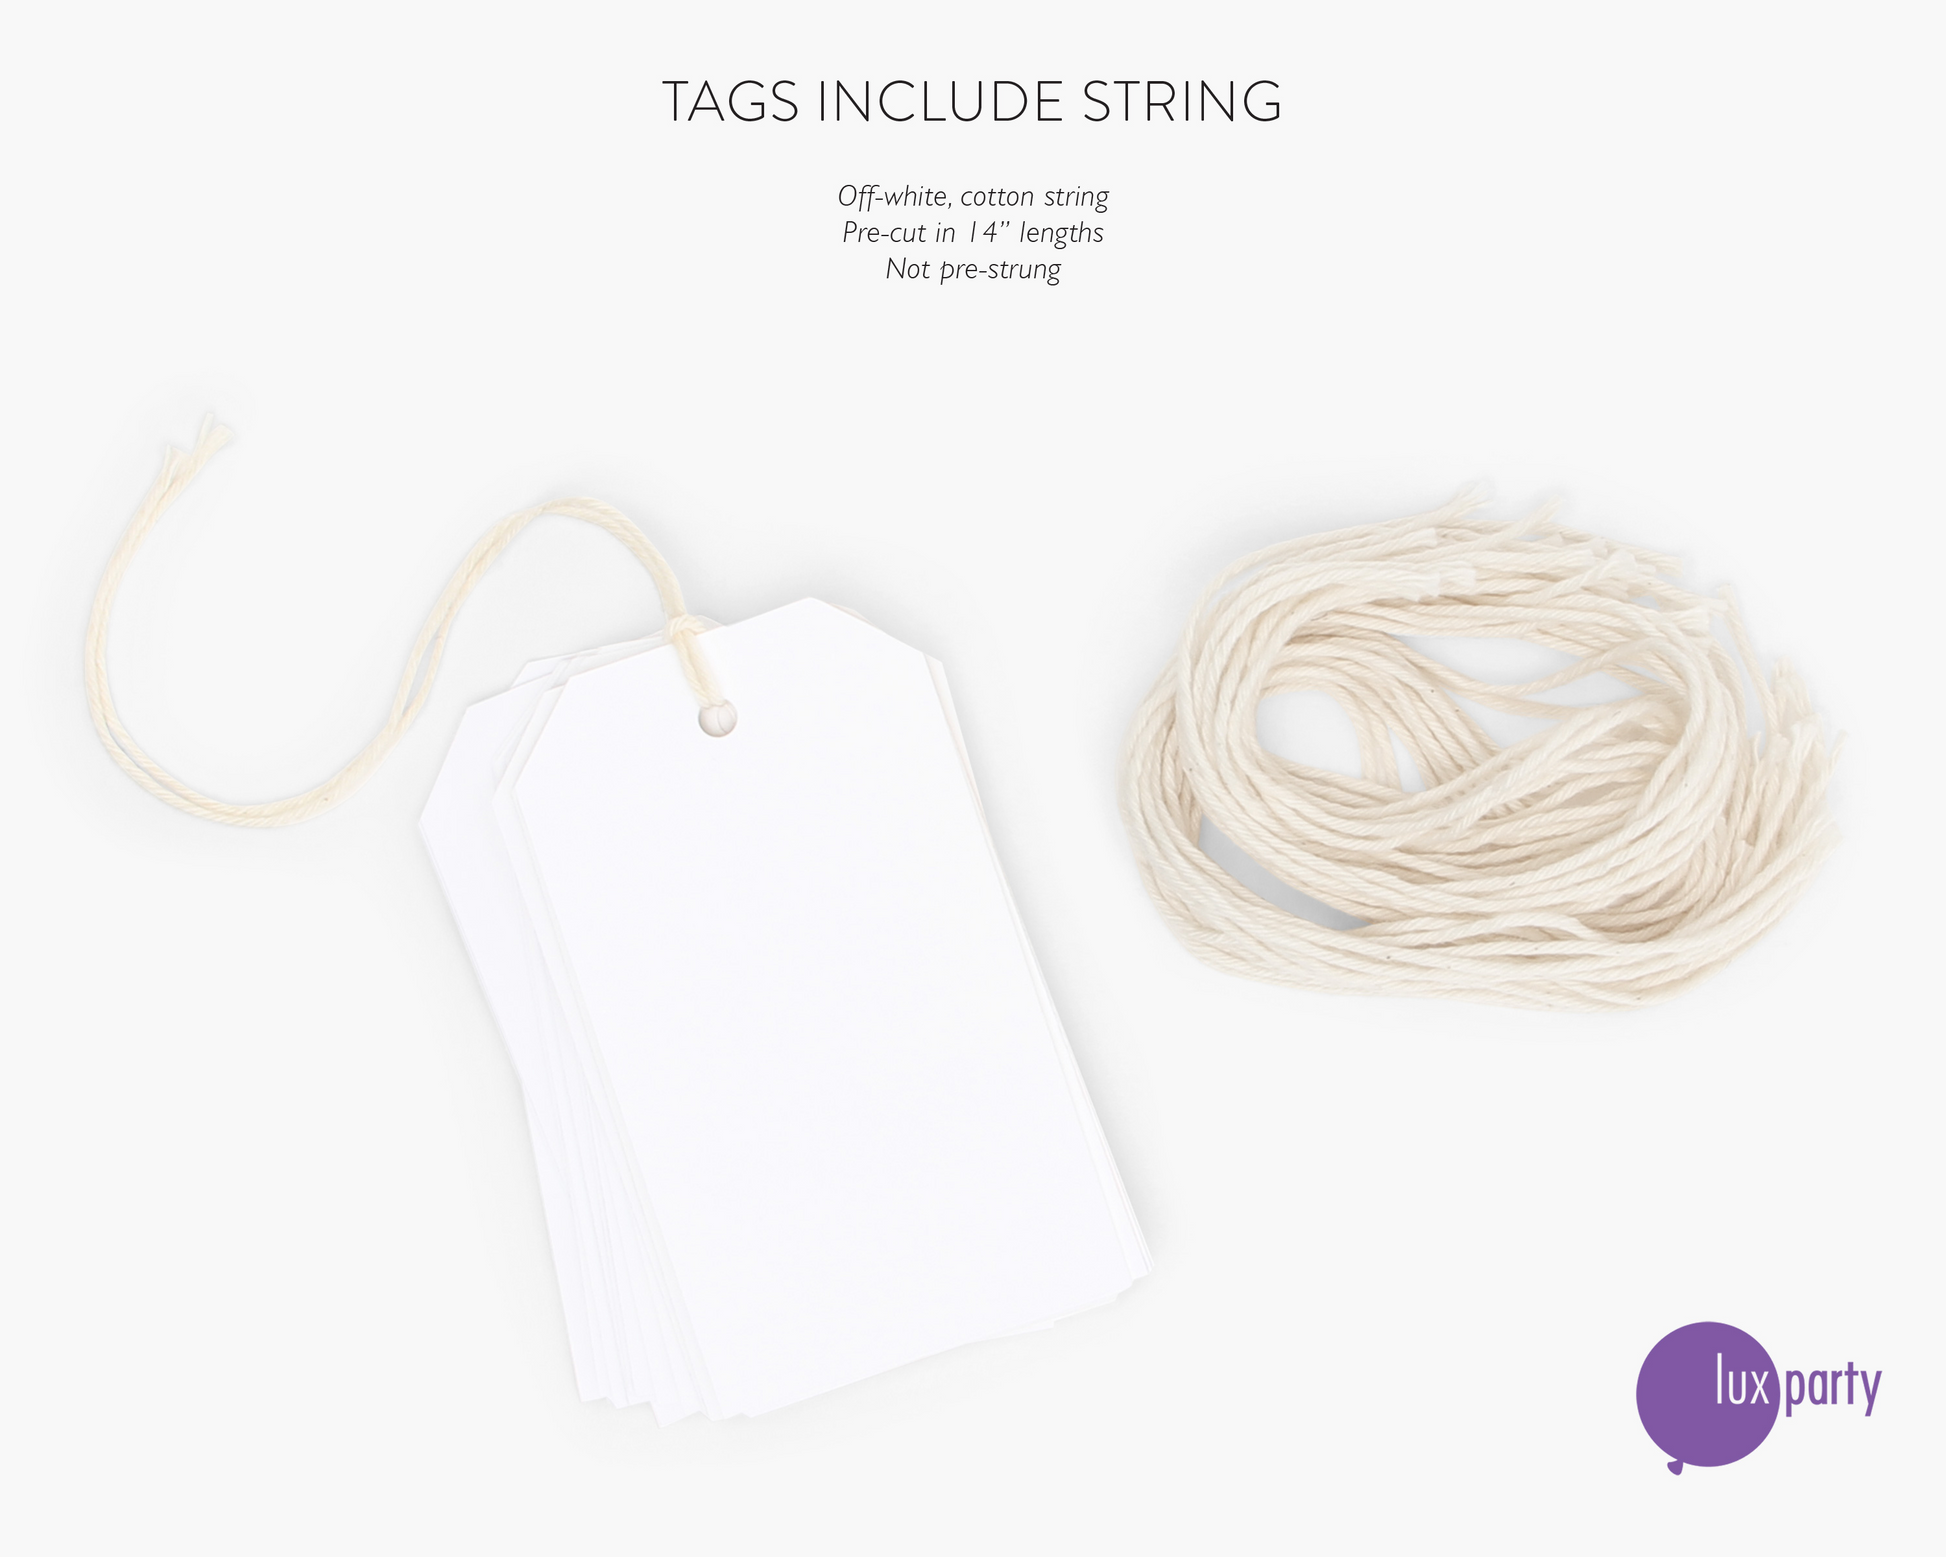 A pile of blank white favor tags, with cropped corners, next to a pile of off-white cotton string. Lux Party logo.